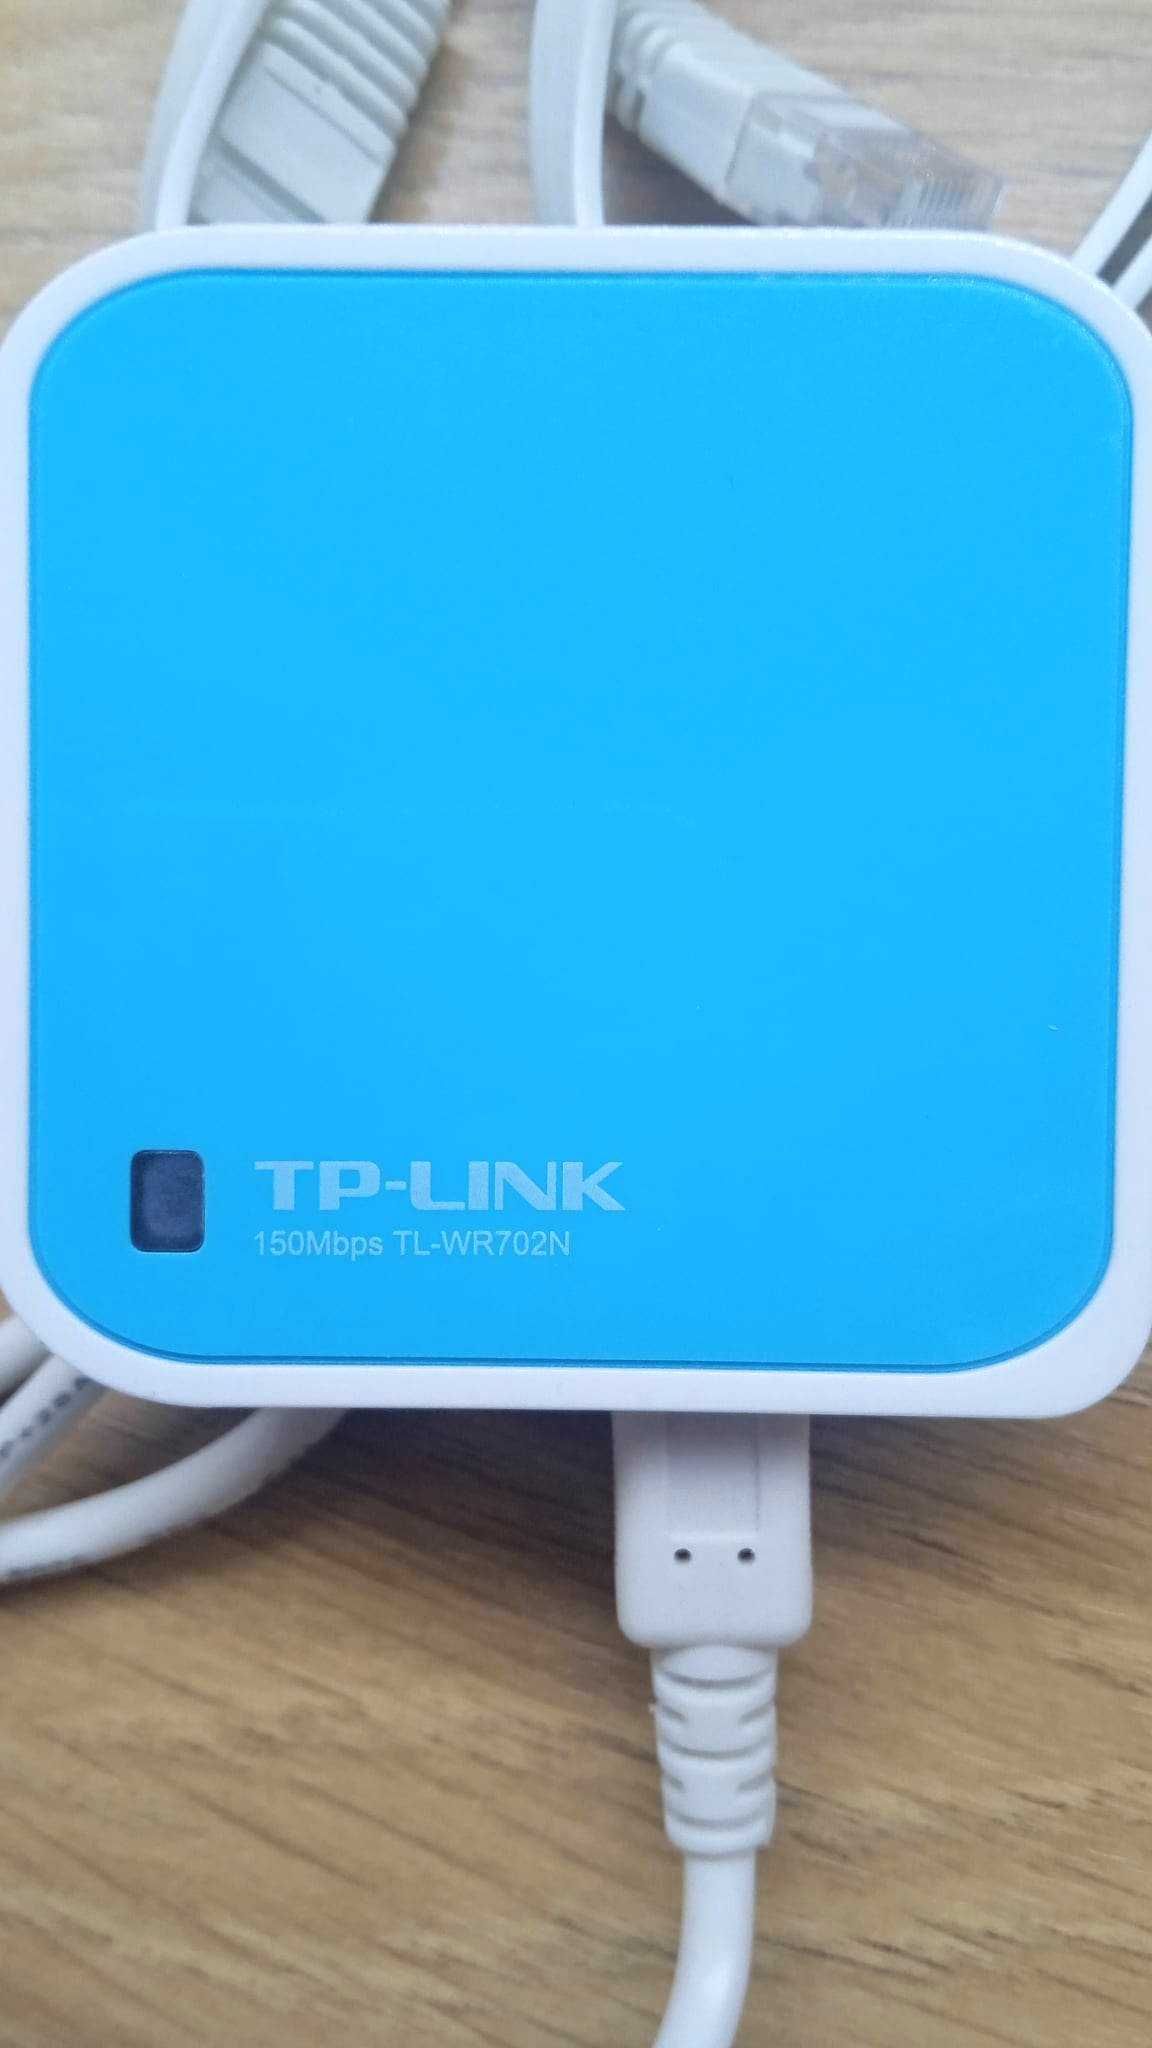 Nano router TP-link TL-WR702N NOWY